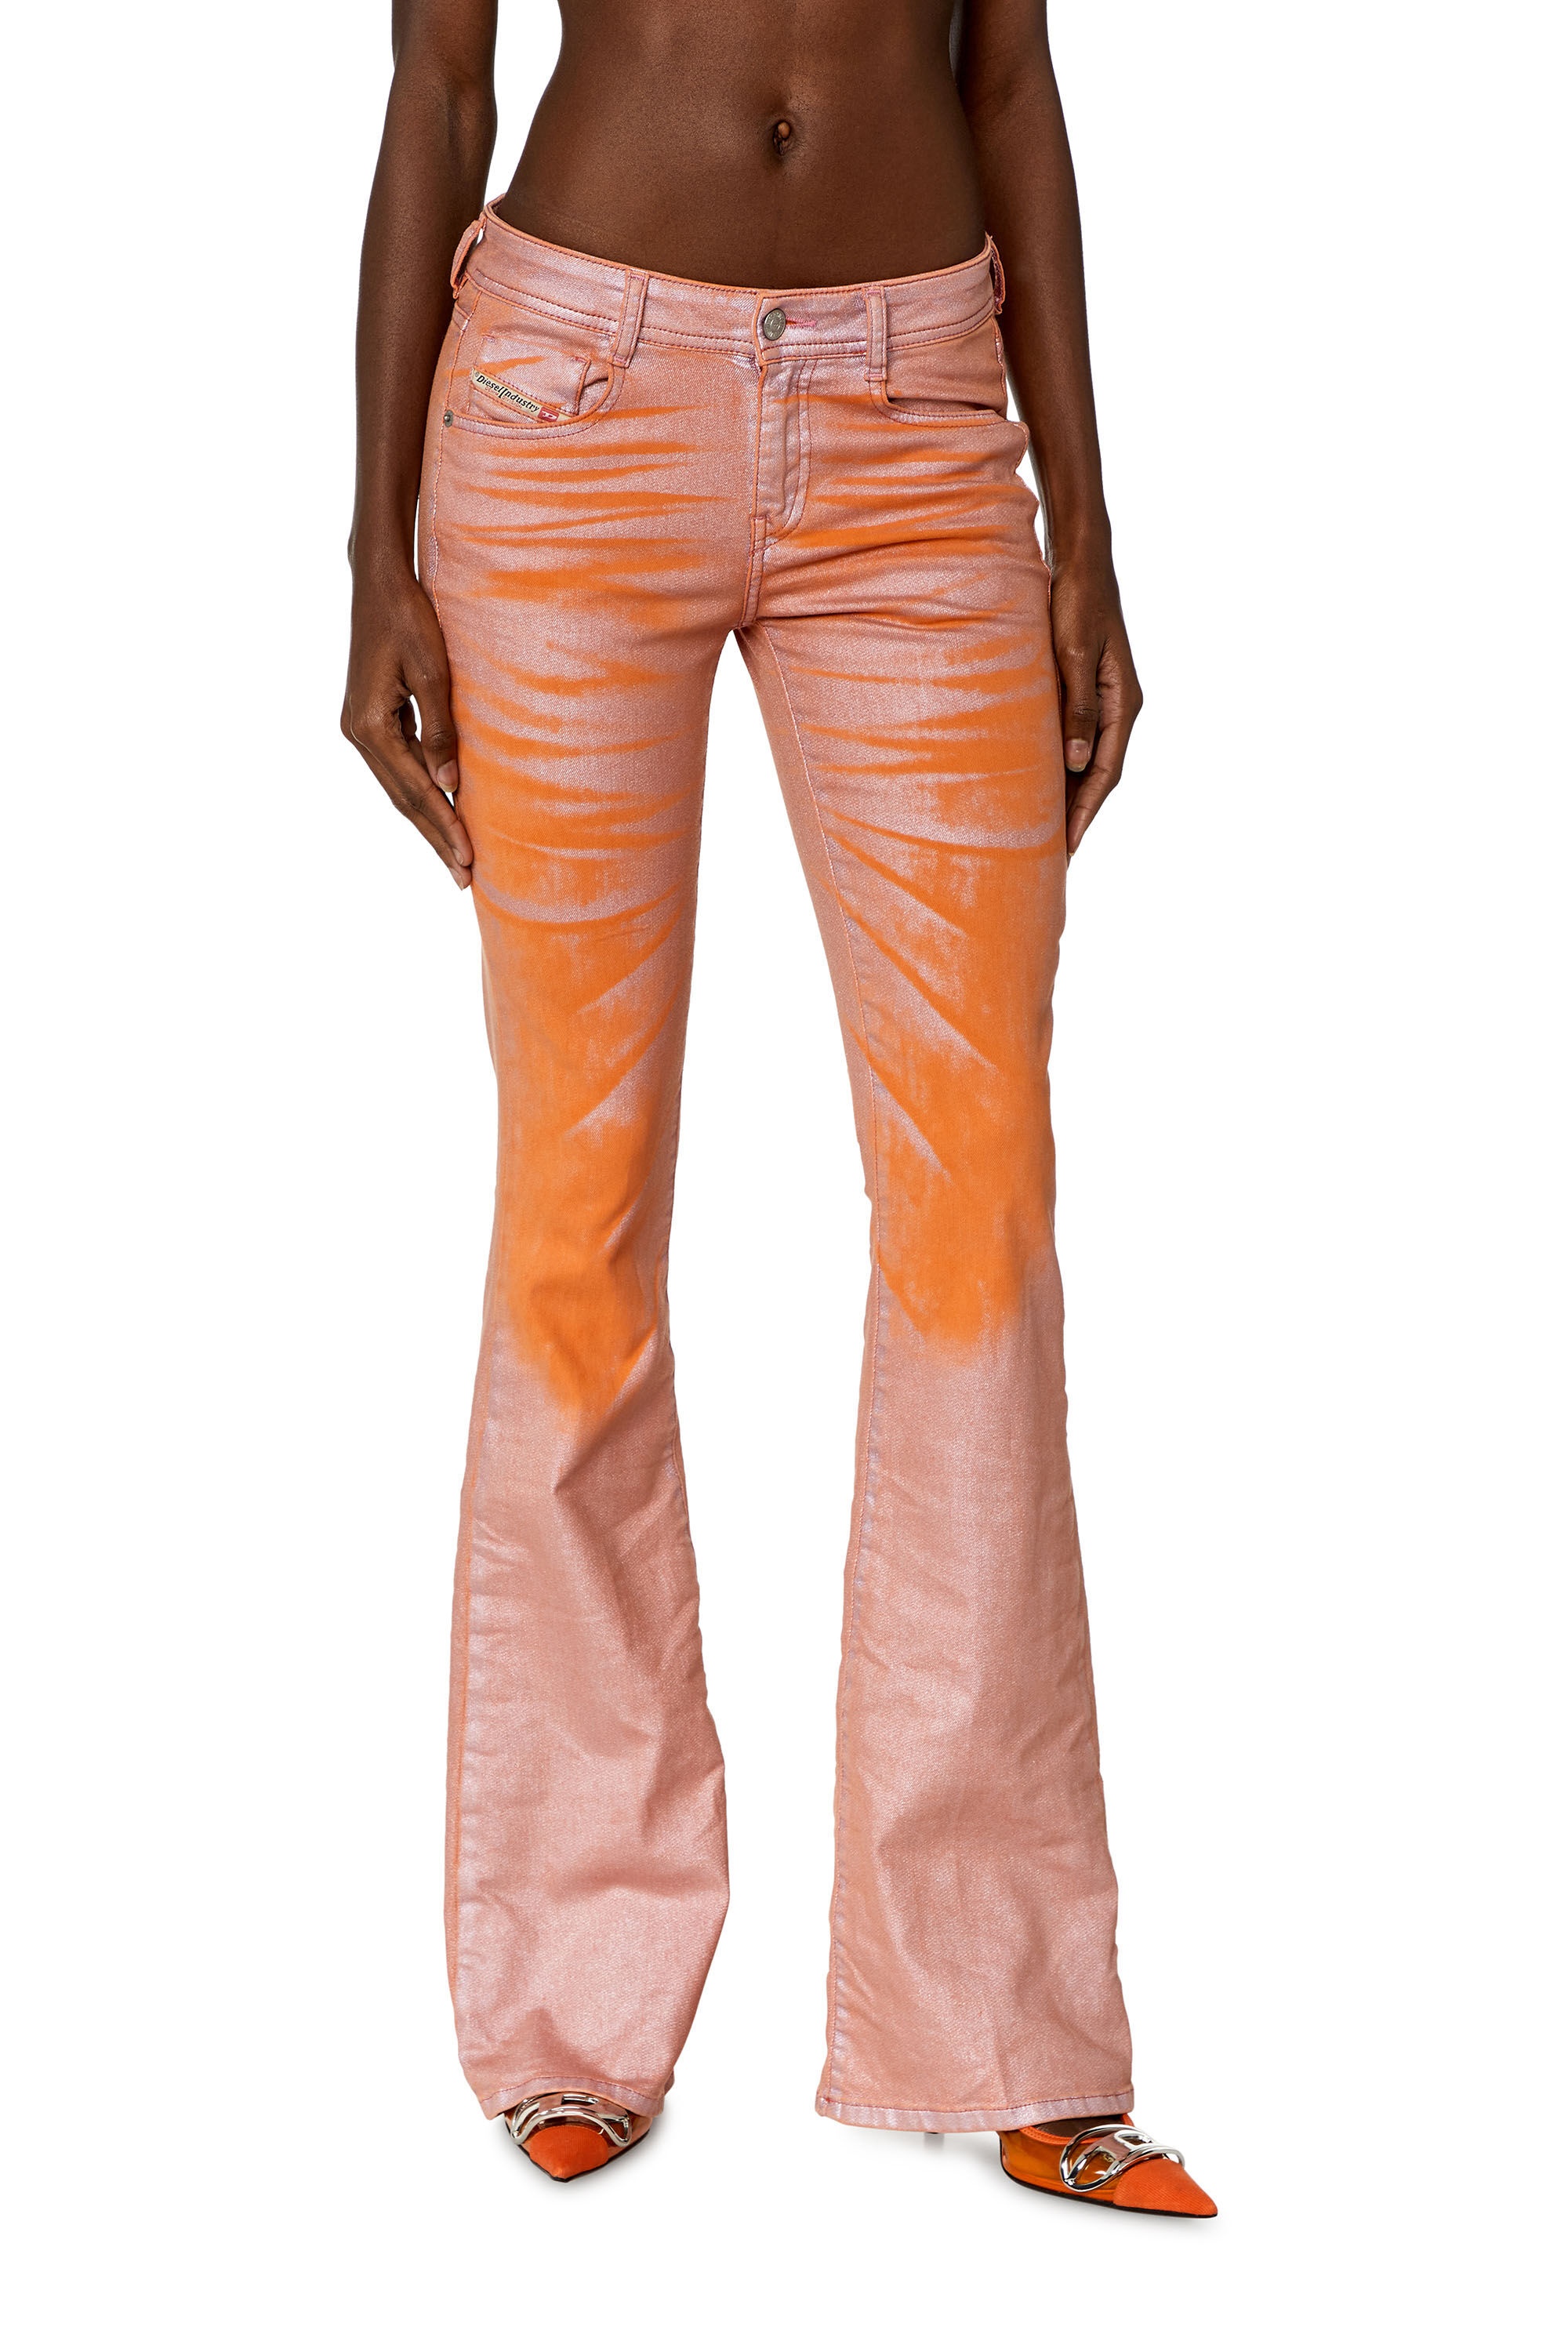 BOOTCUT AND FLARE JEANS 1969 D-EBBEY 068KT - 3